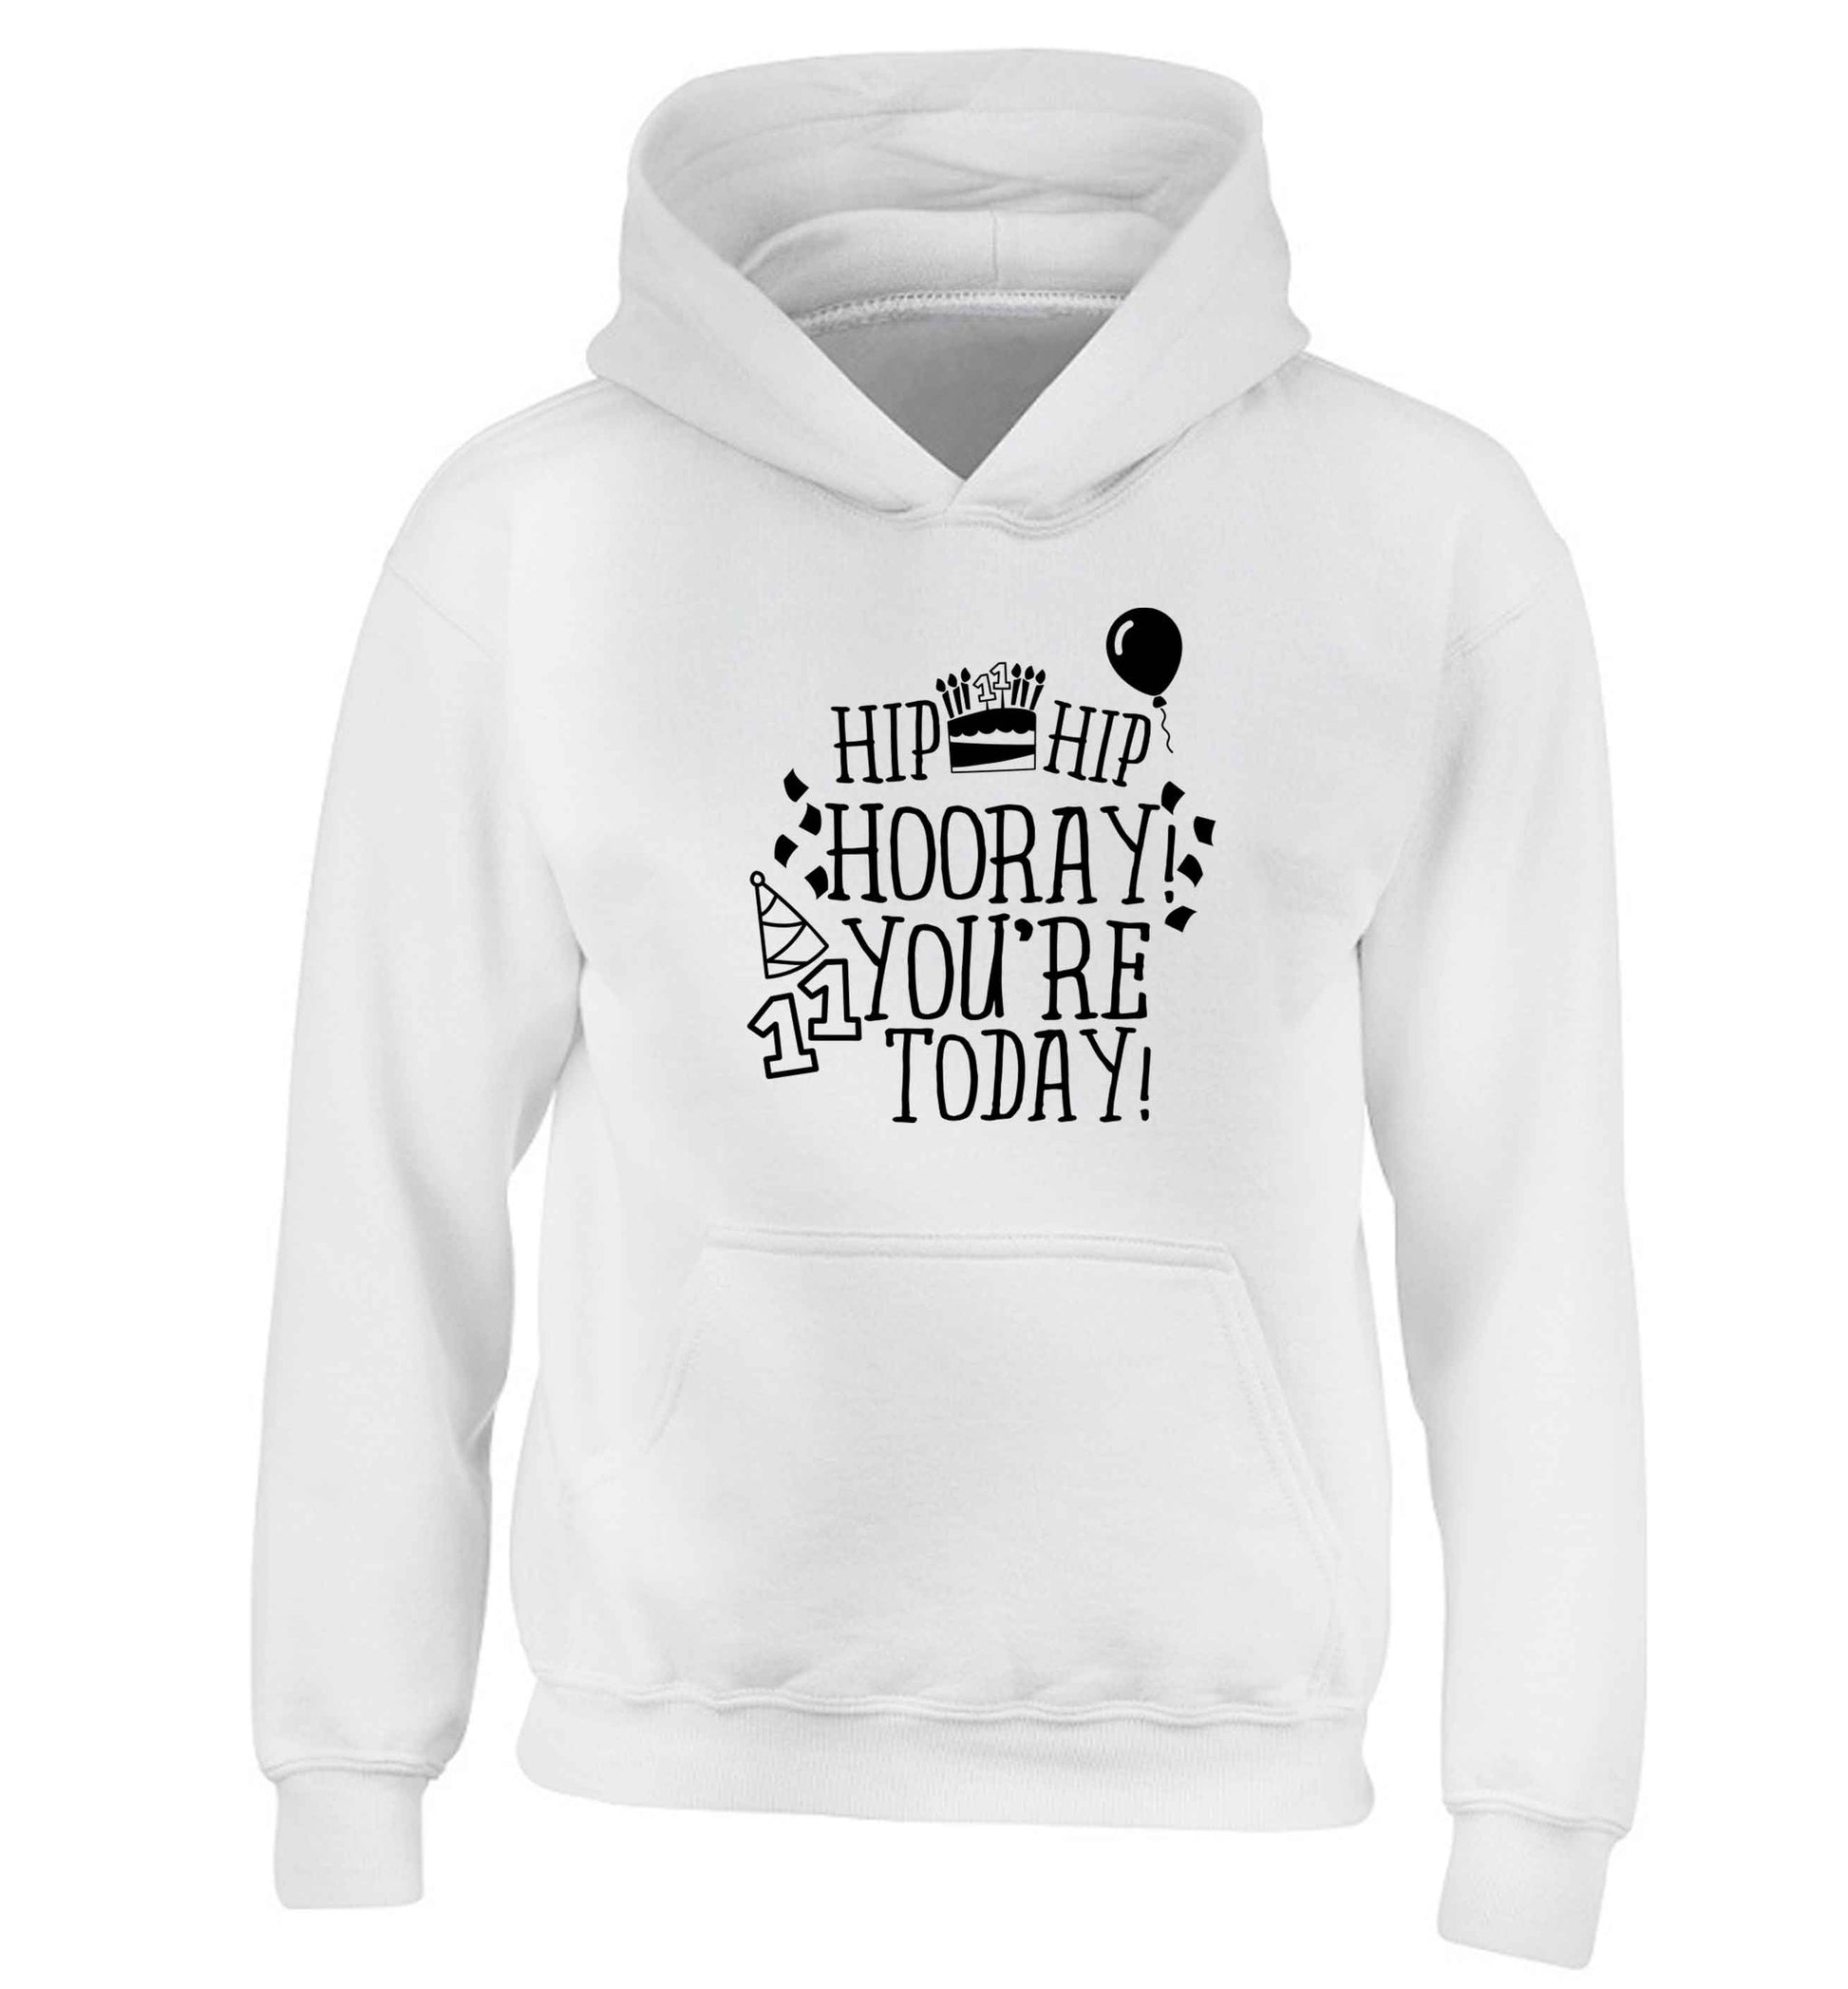 Hip hip hooray I you're eleven today! children's white hoodie 12-13 Years